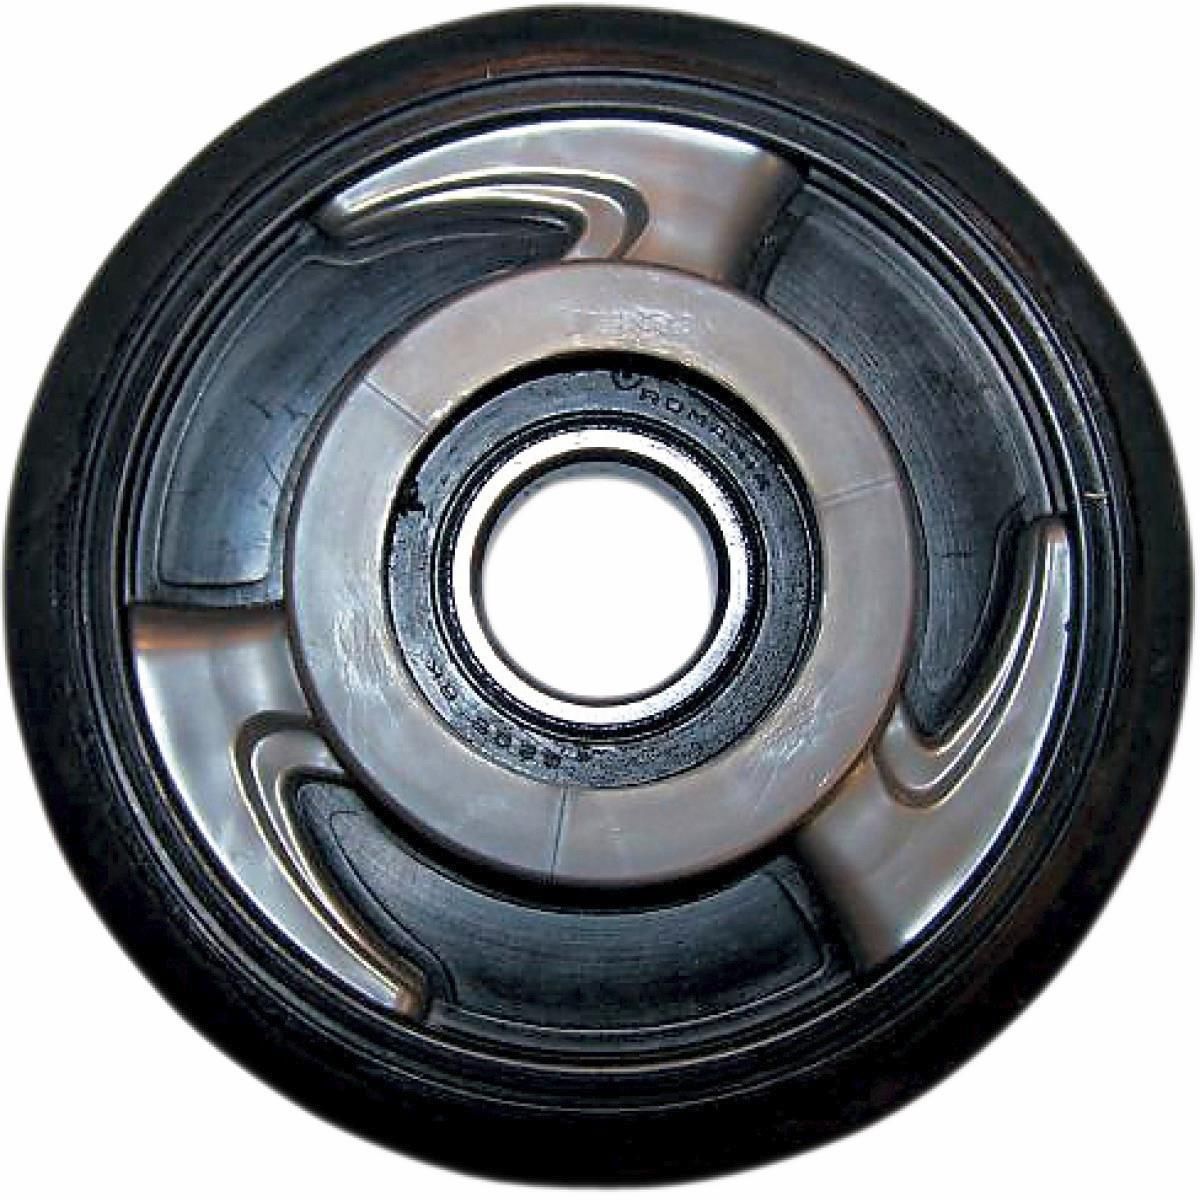 32XX-PARTS-UNLIM-47020025 Colored Idler Wheel - 130mm (No Insert) - Silver